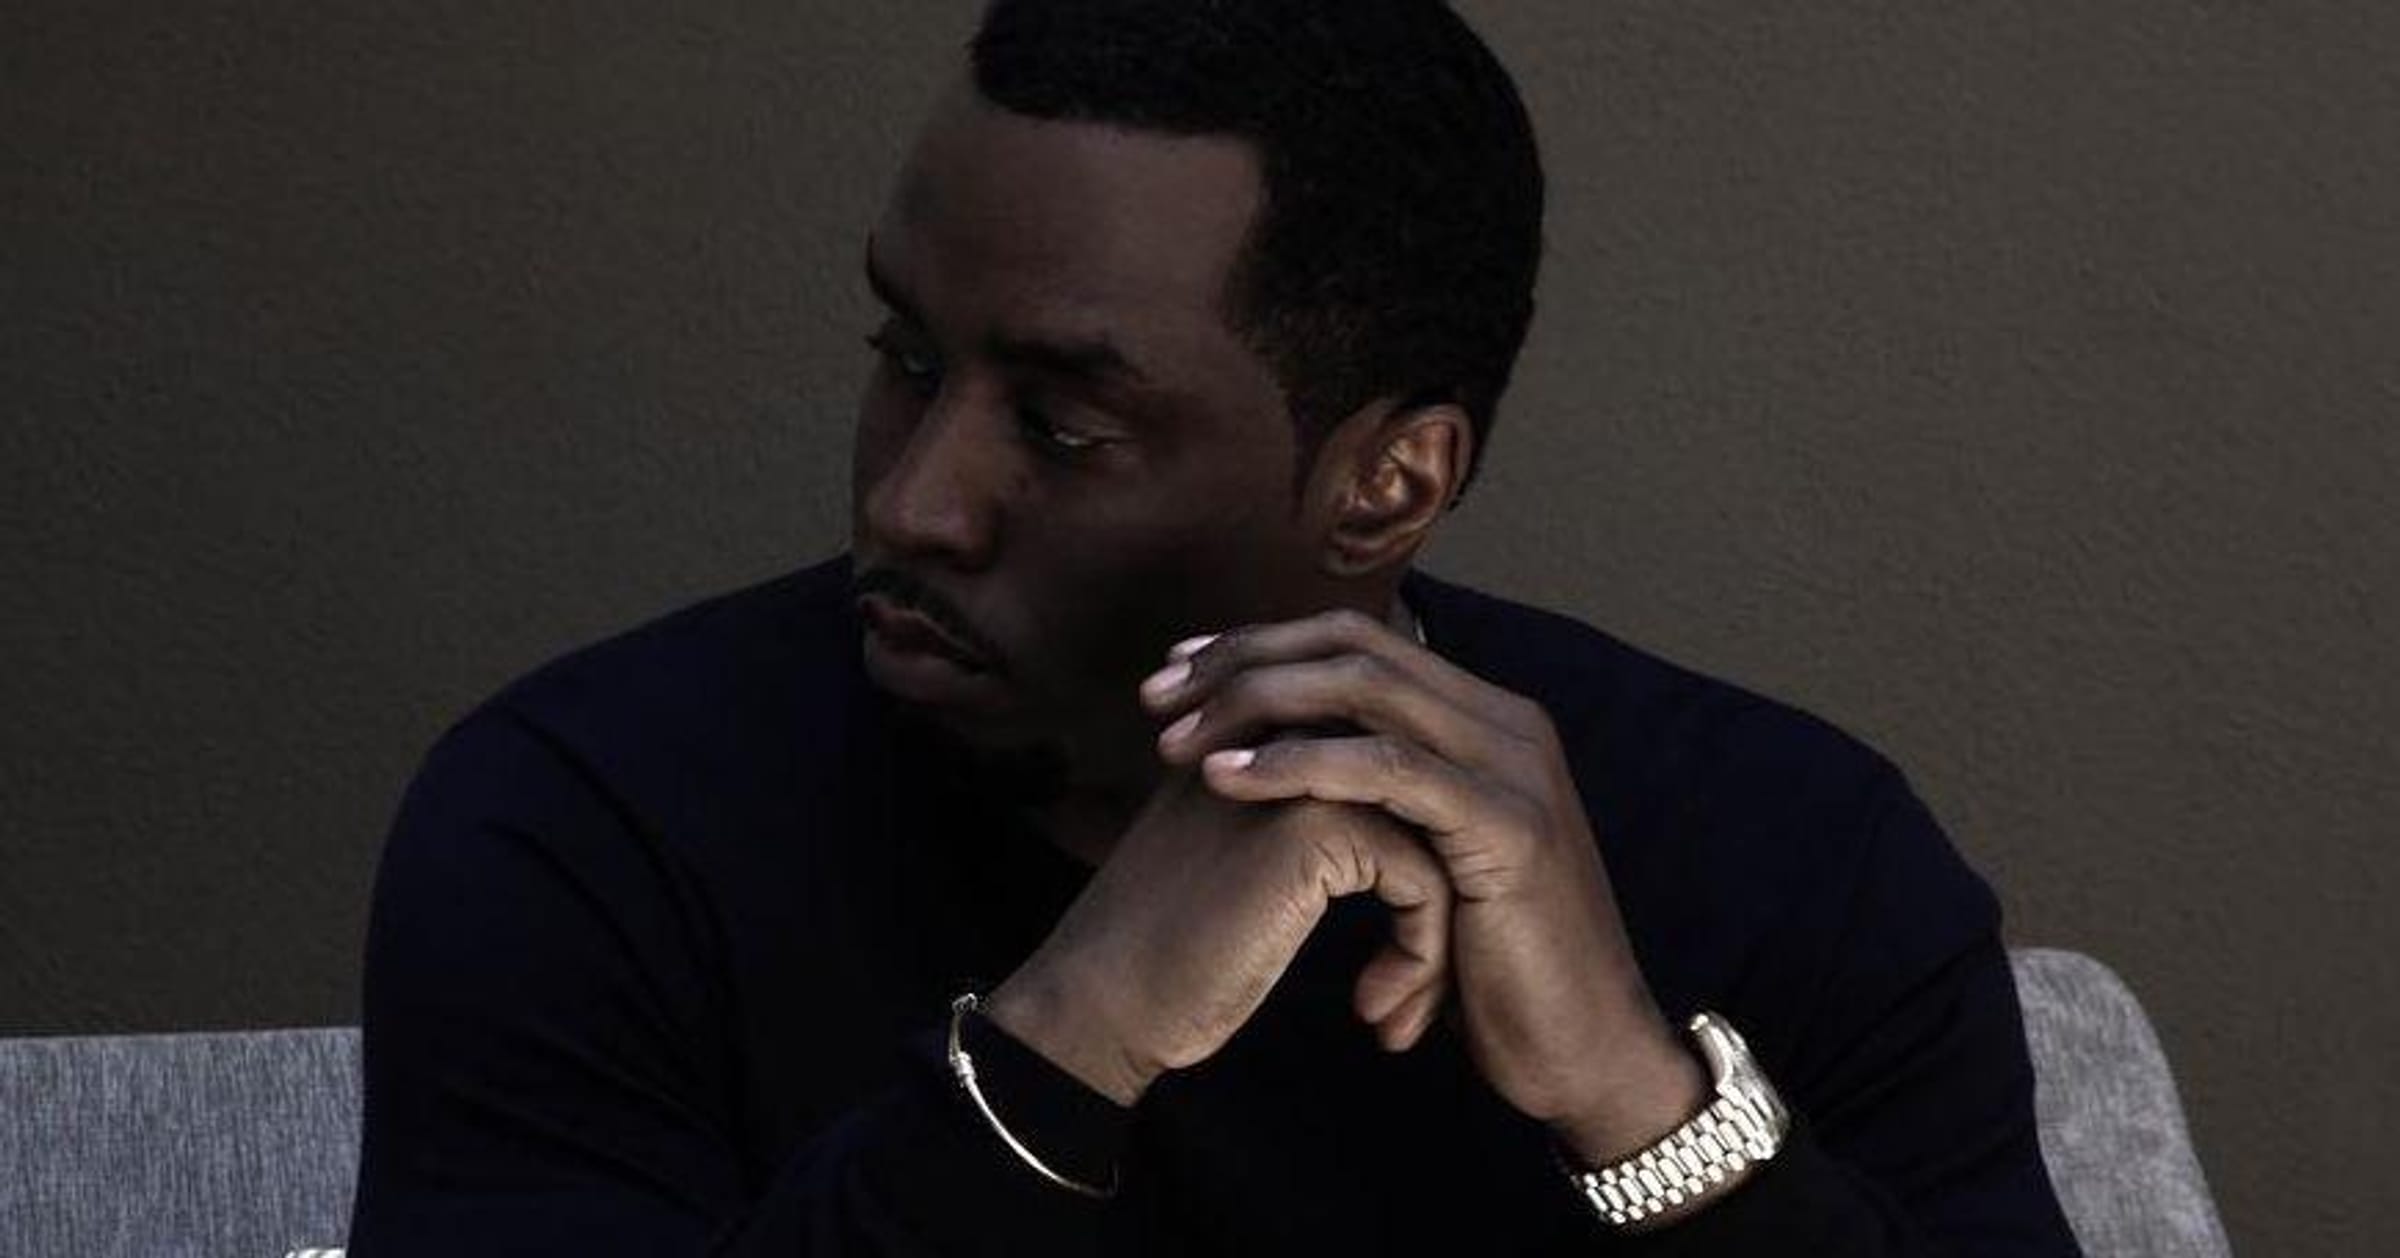 Diddy's 'The Love Album': A Song by Song Guide to Featured Artists